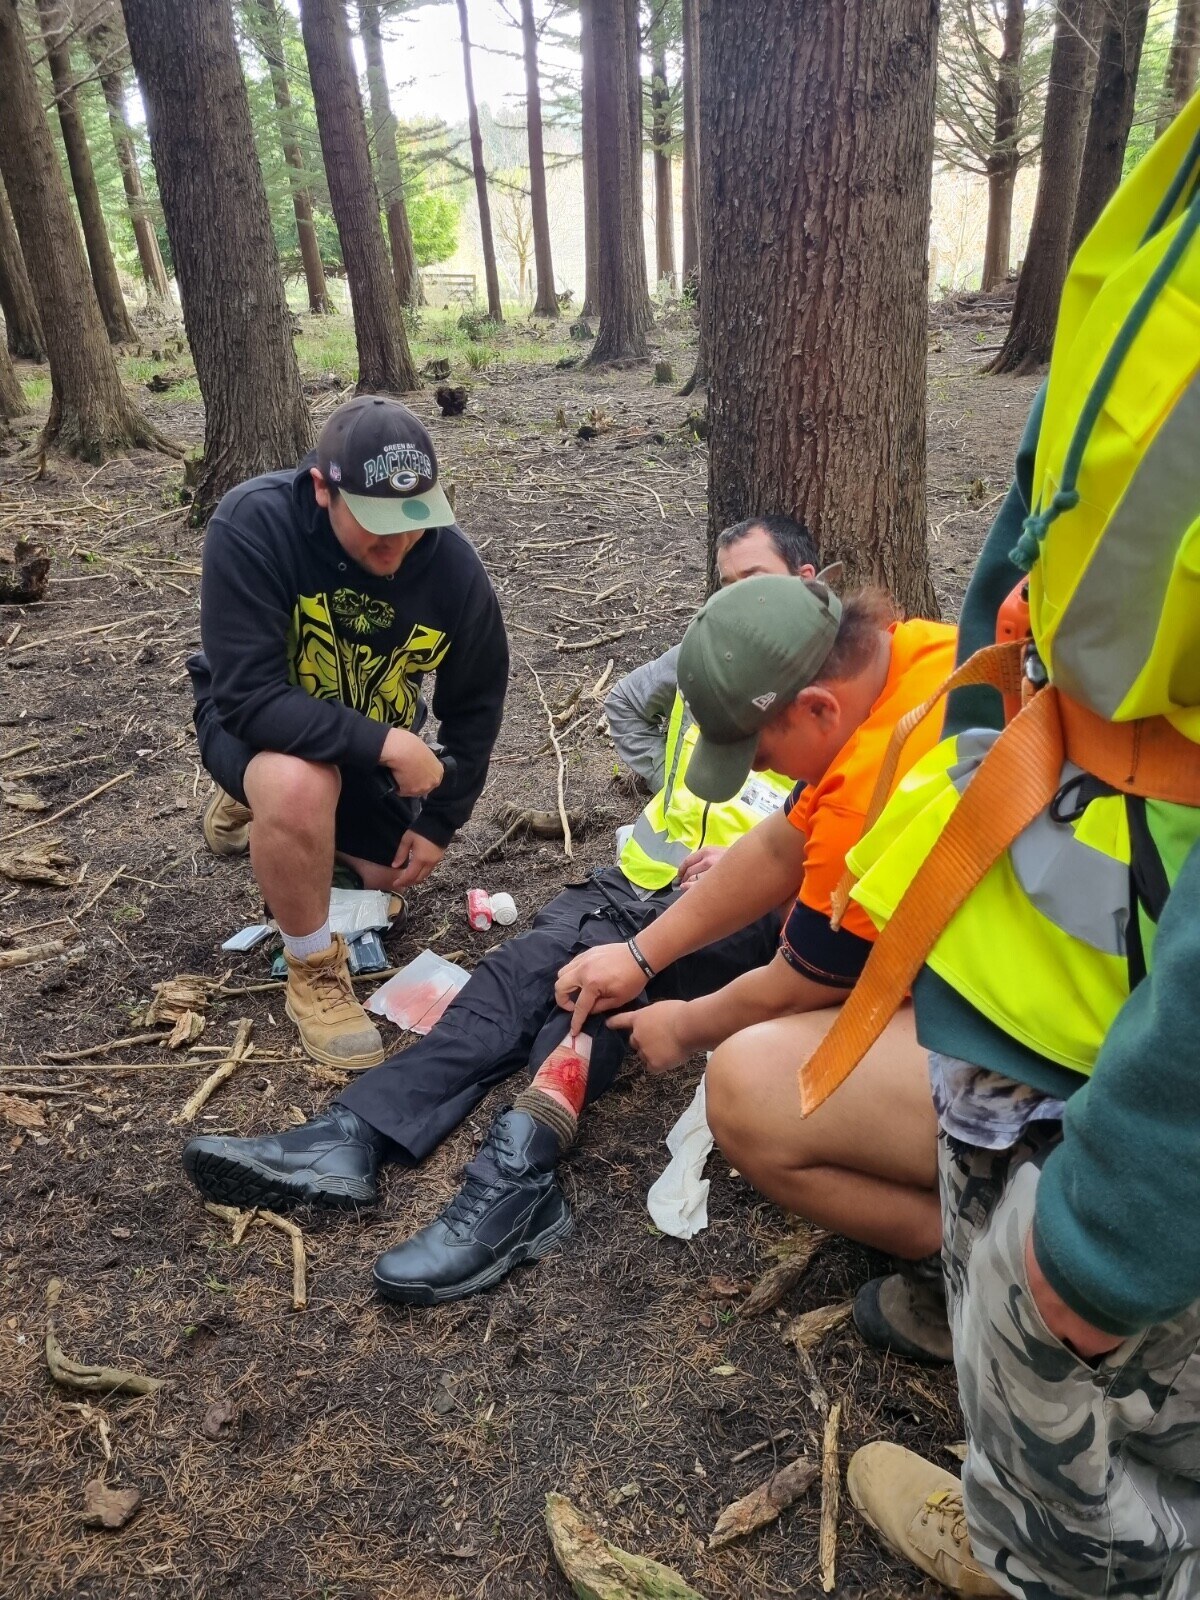 Manaia Olsen (left) and Kaloni Taylor (right) taking lead in assisting Scott Carr with cut artery scenario training.